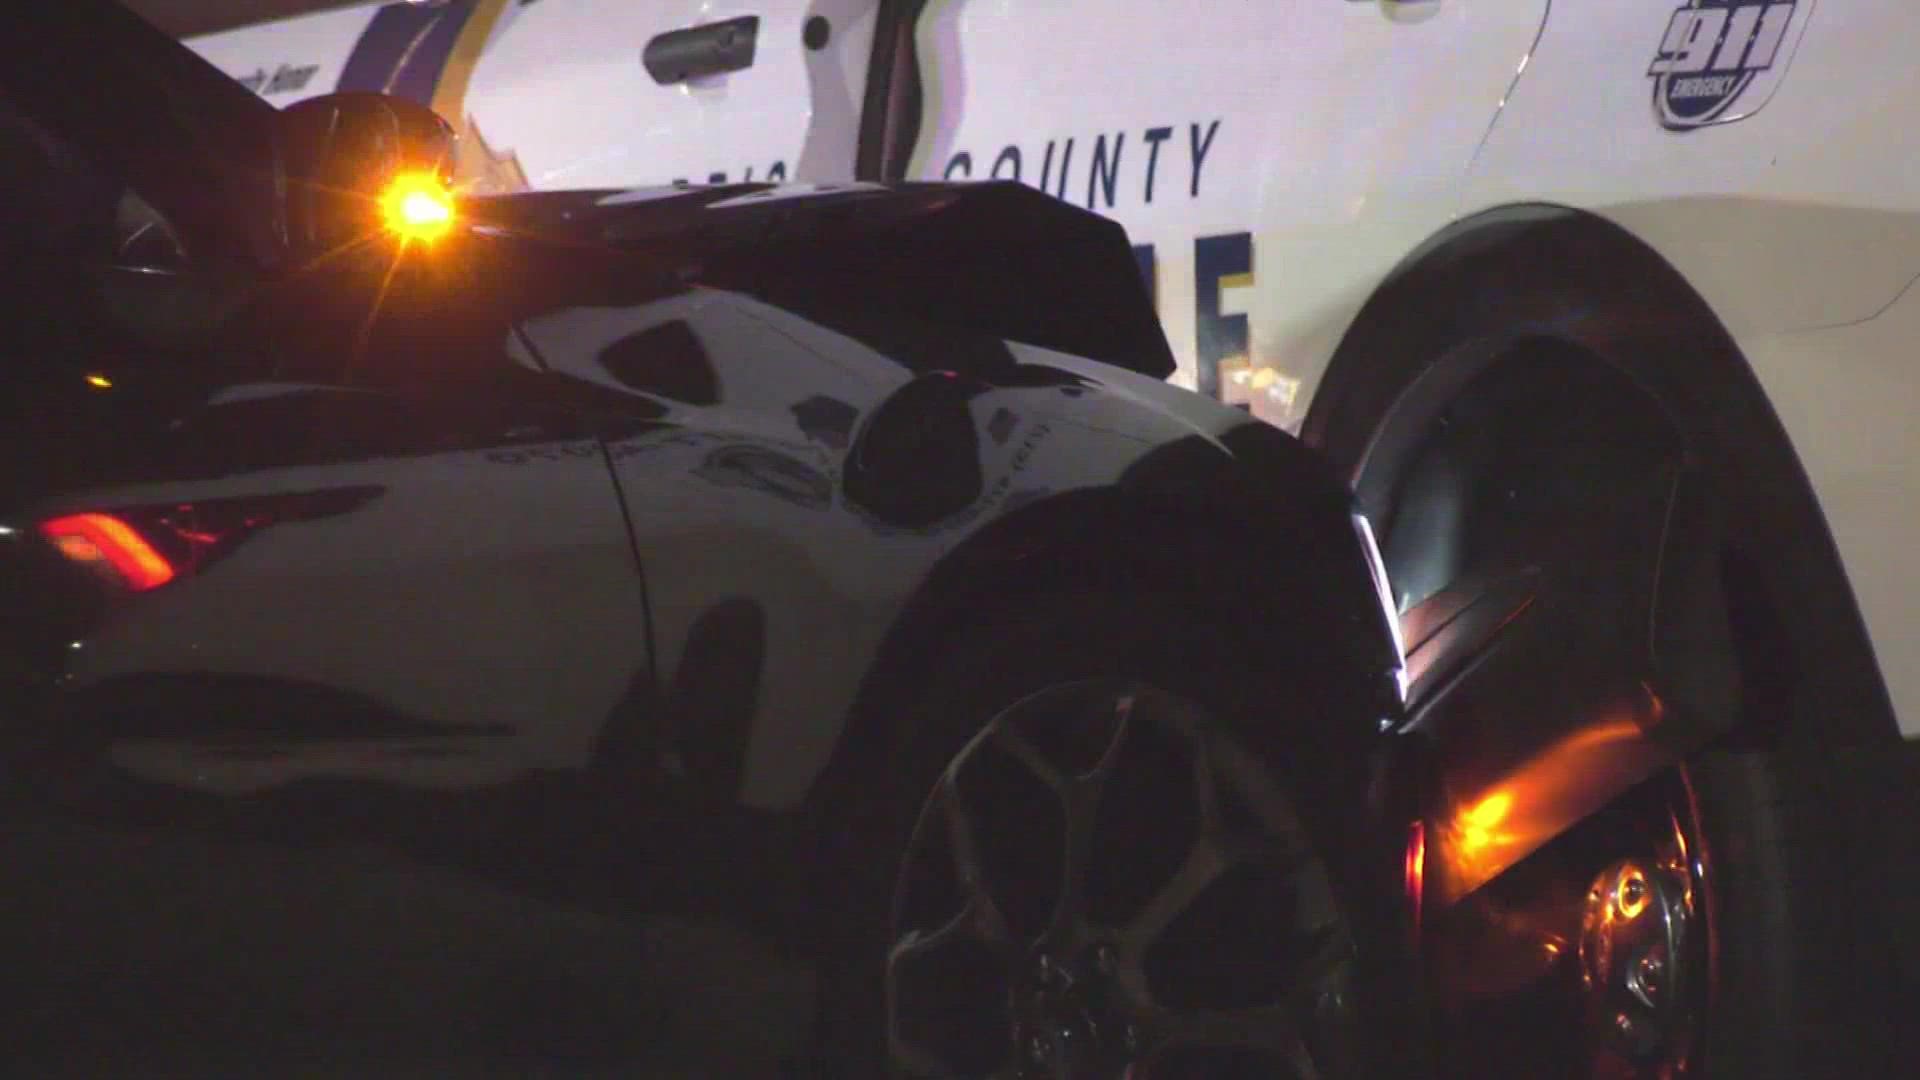 Harris County Pct. 2 says the deputy may have sustained a leg injury in the crash.